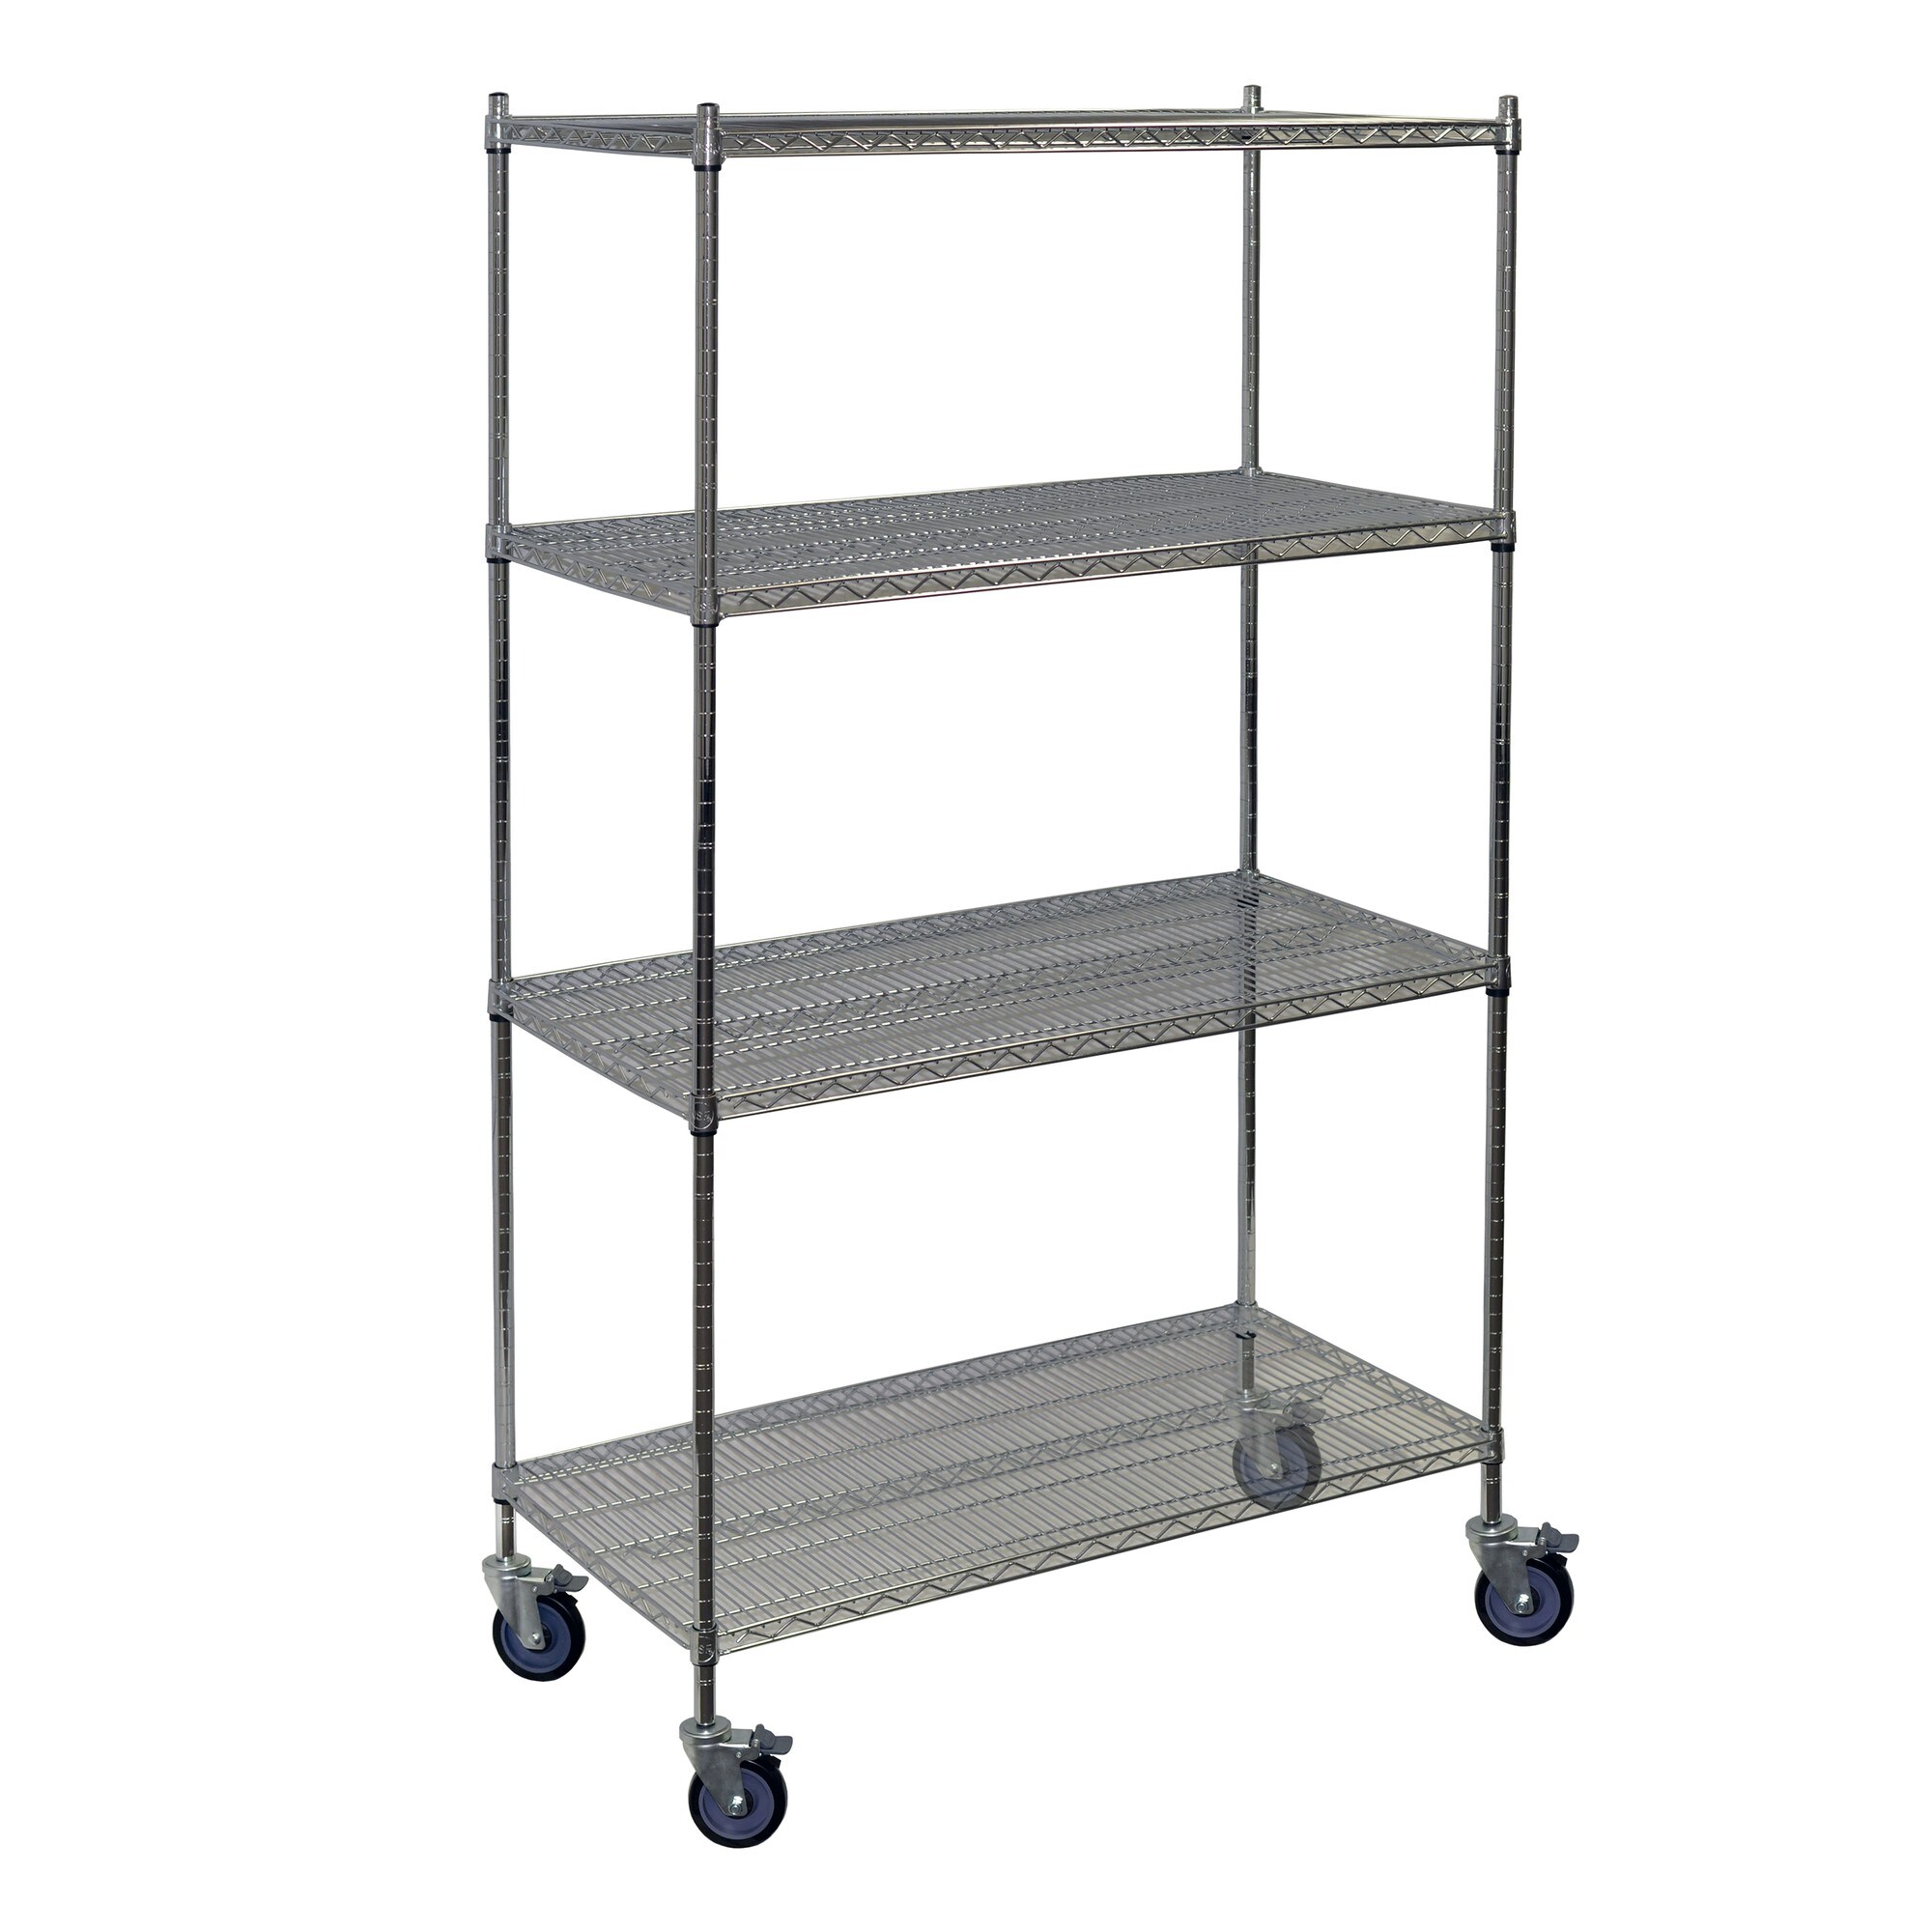 Storage Concepts Freestanding Shelving Units at